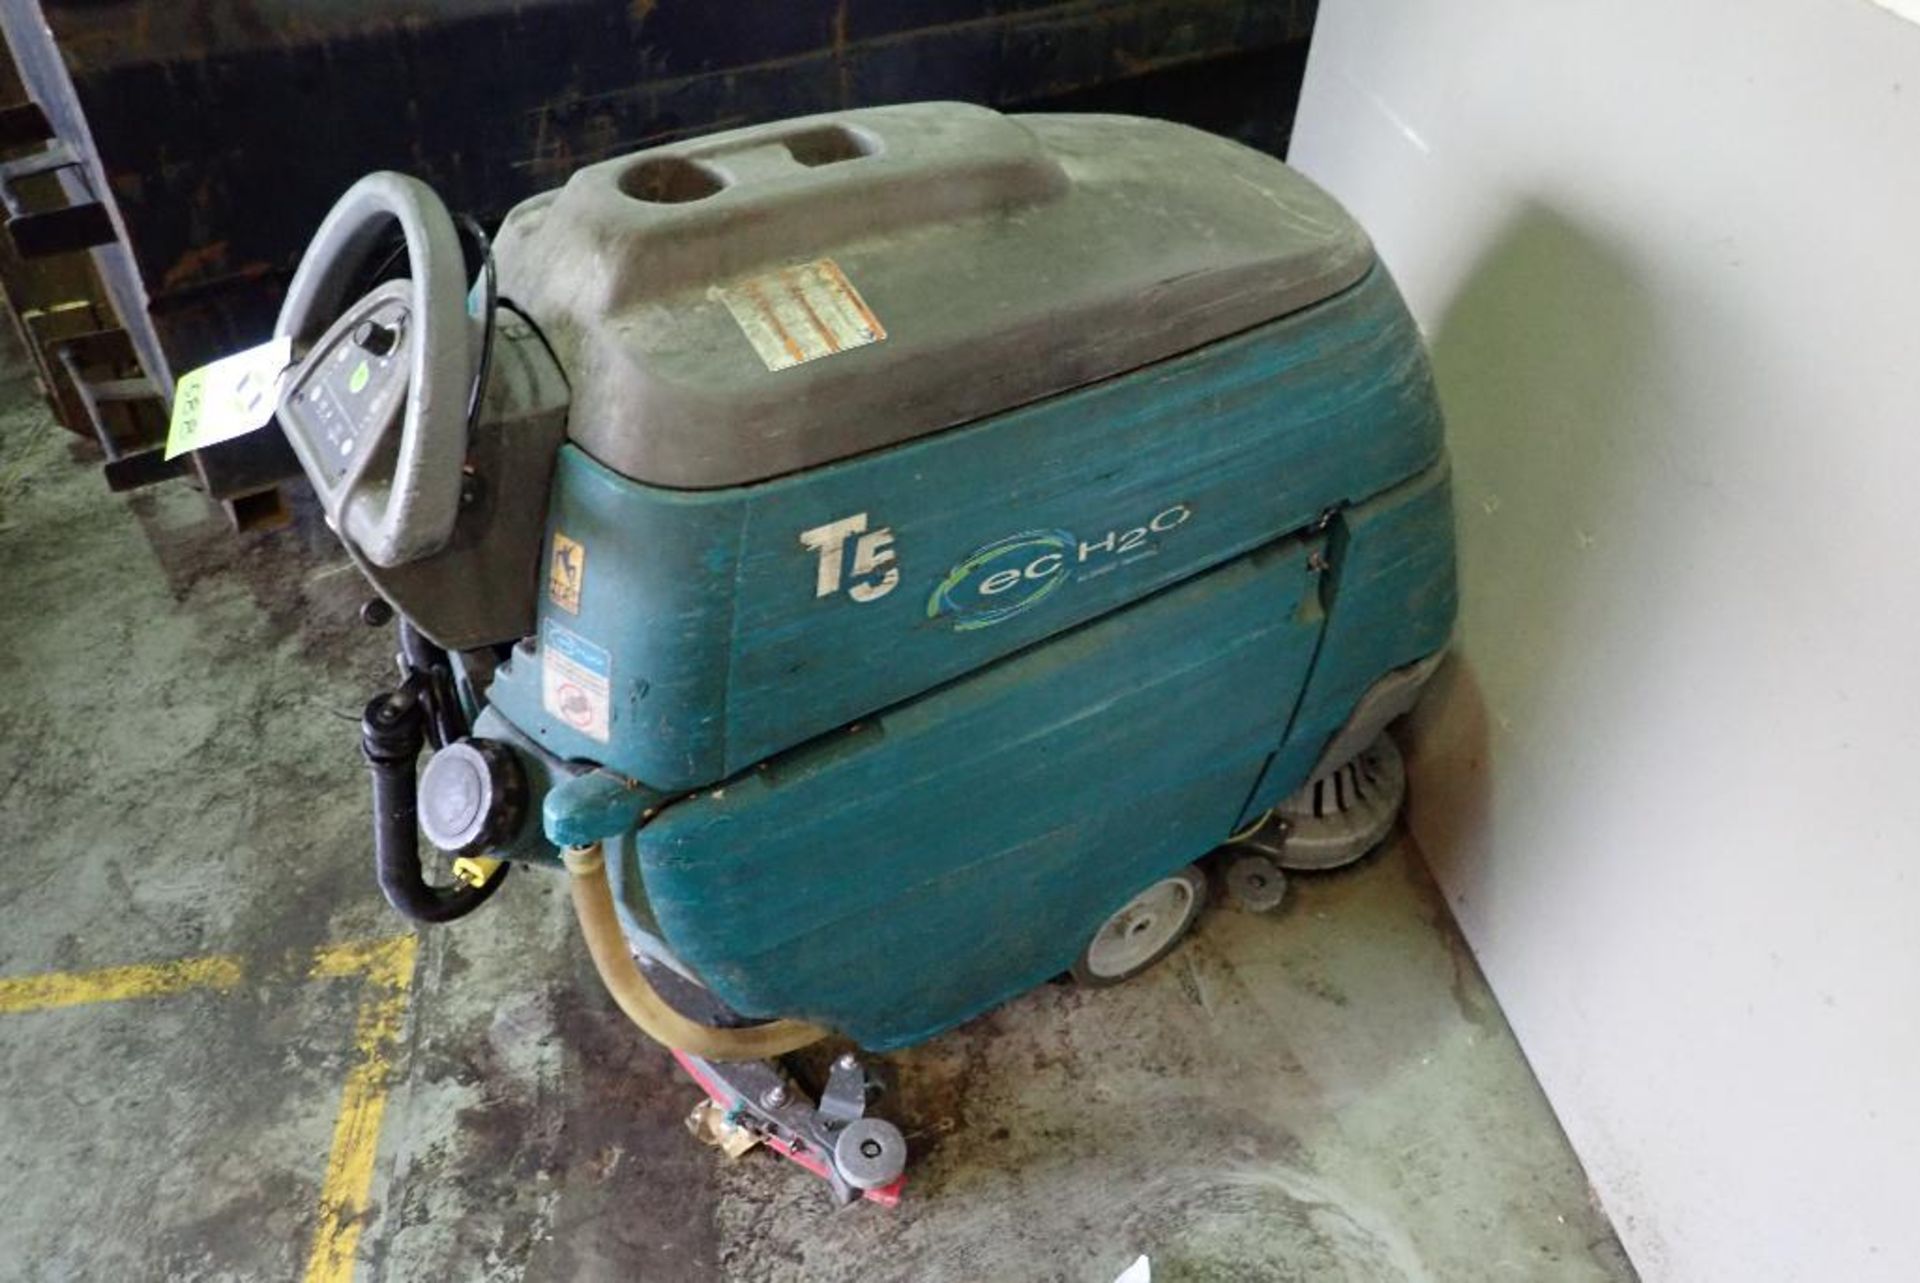 Tennant 24 volt floor scrubber, Model T5, SN T5-10579785, on board charger, 4732 hours, runs but was - Image 7 of 8